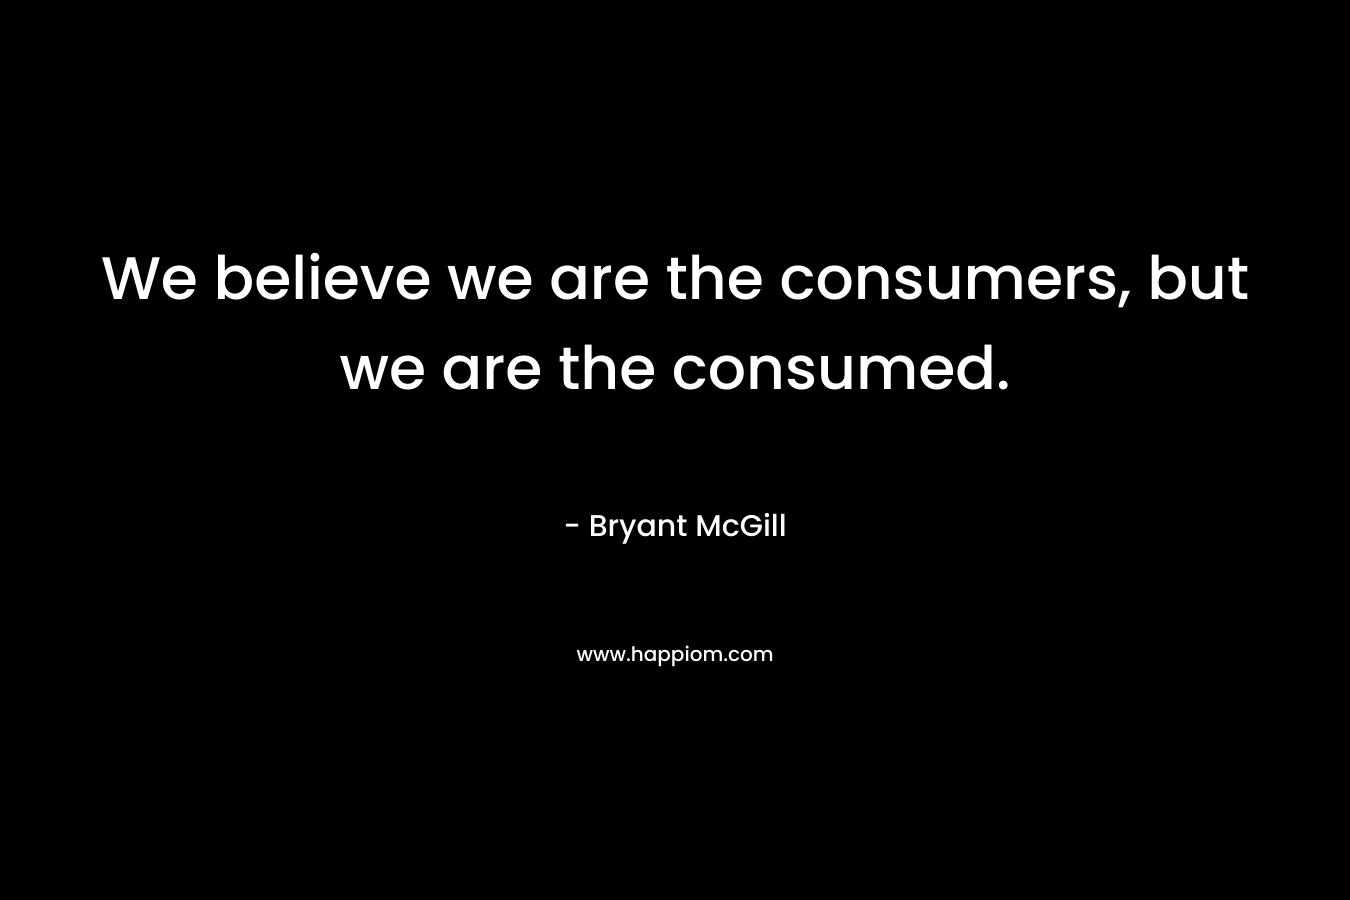 We believe we are the consumers, but we are the consumed. – Bryant McGill